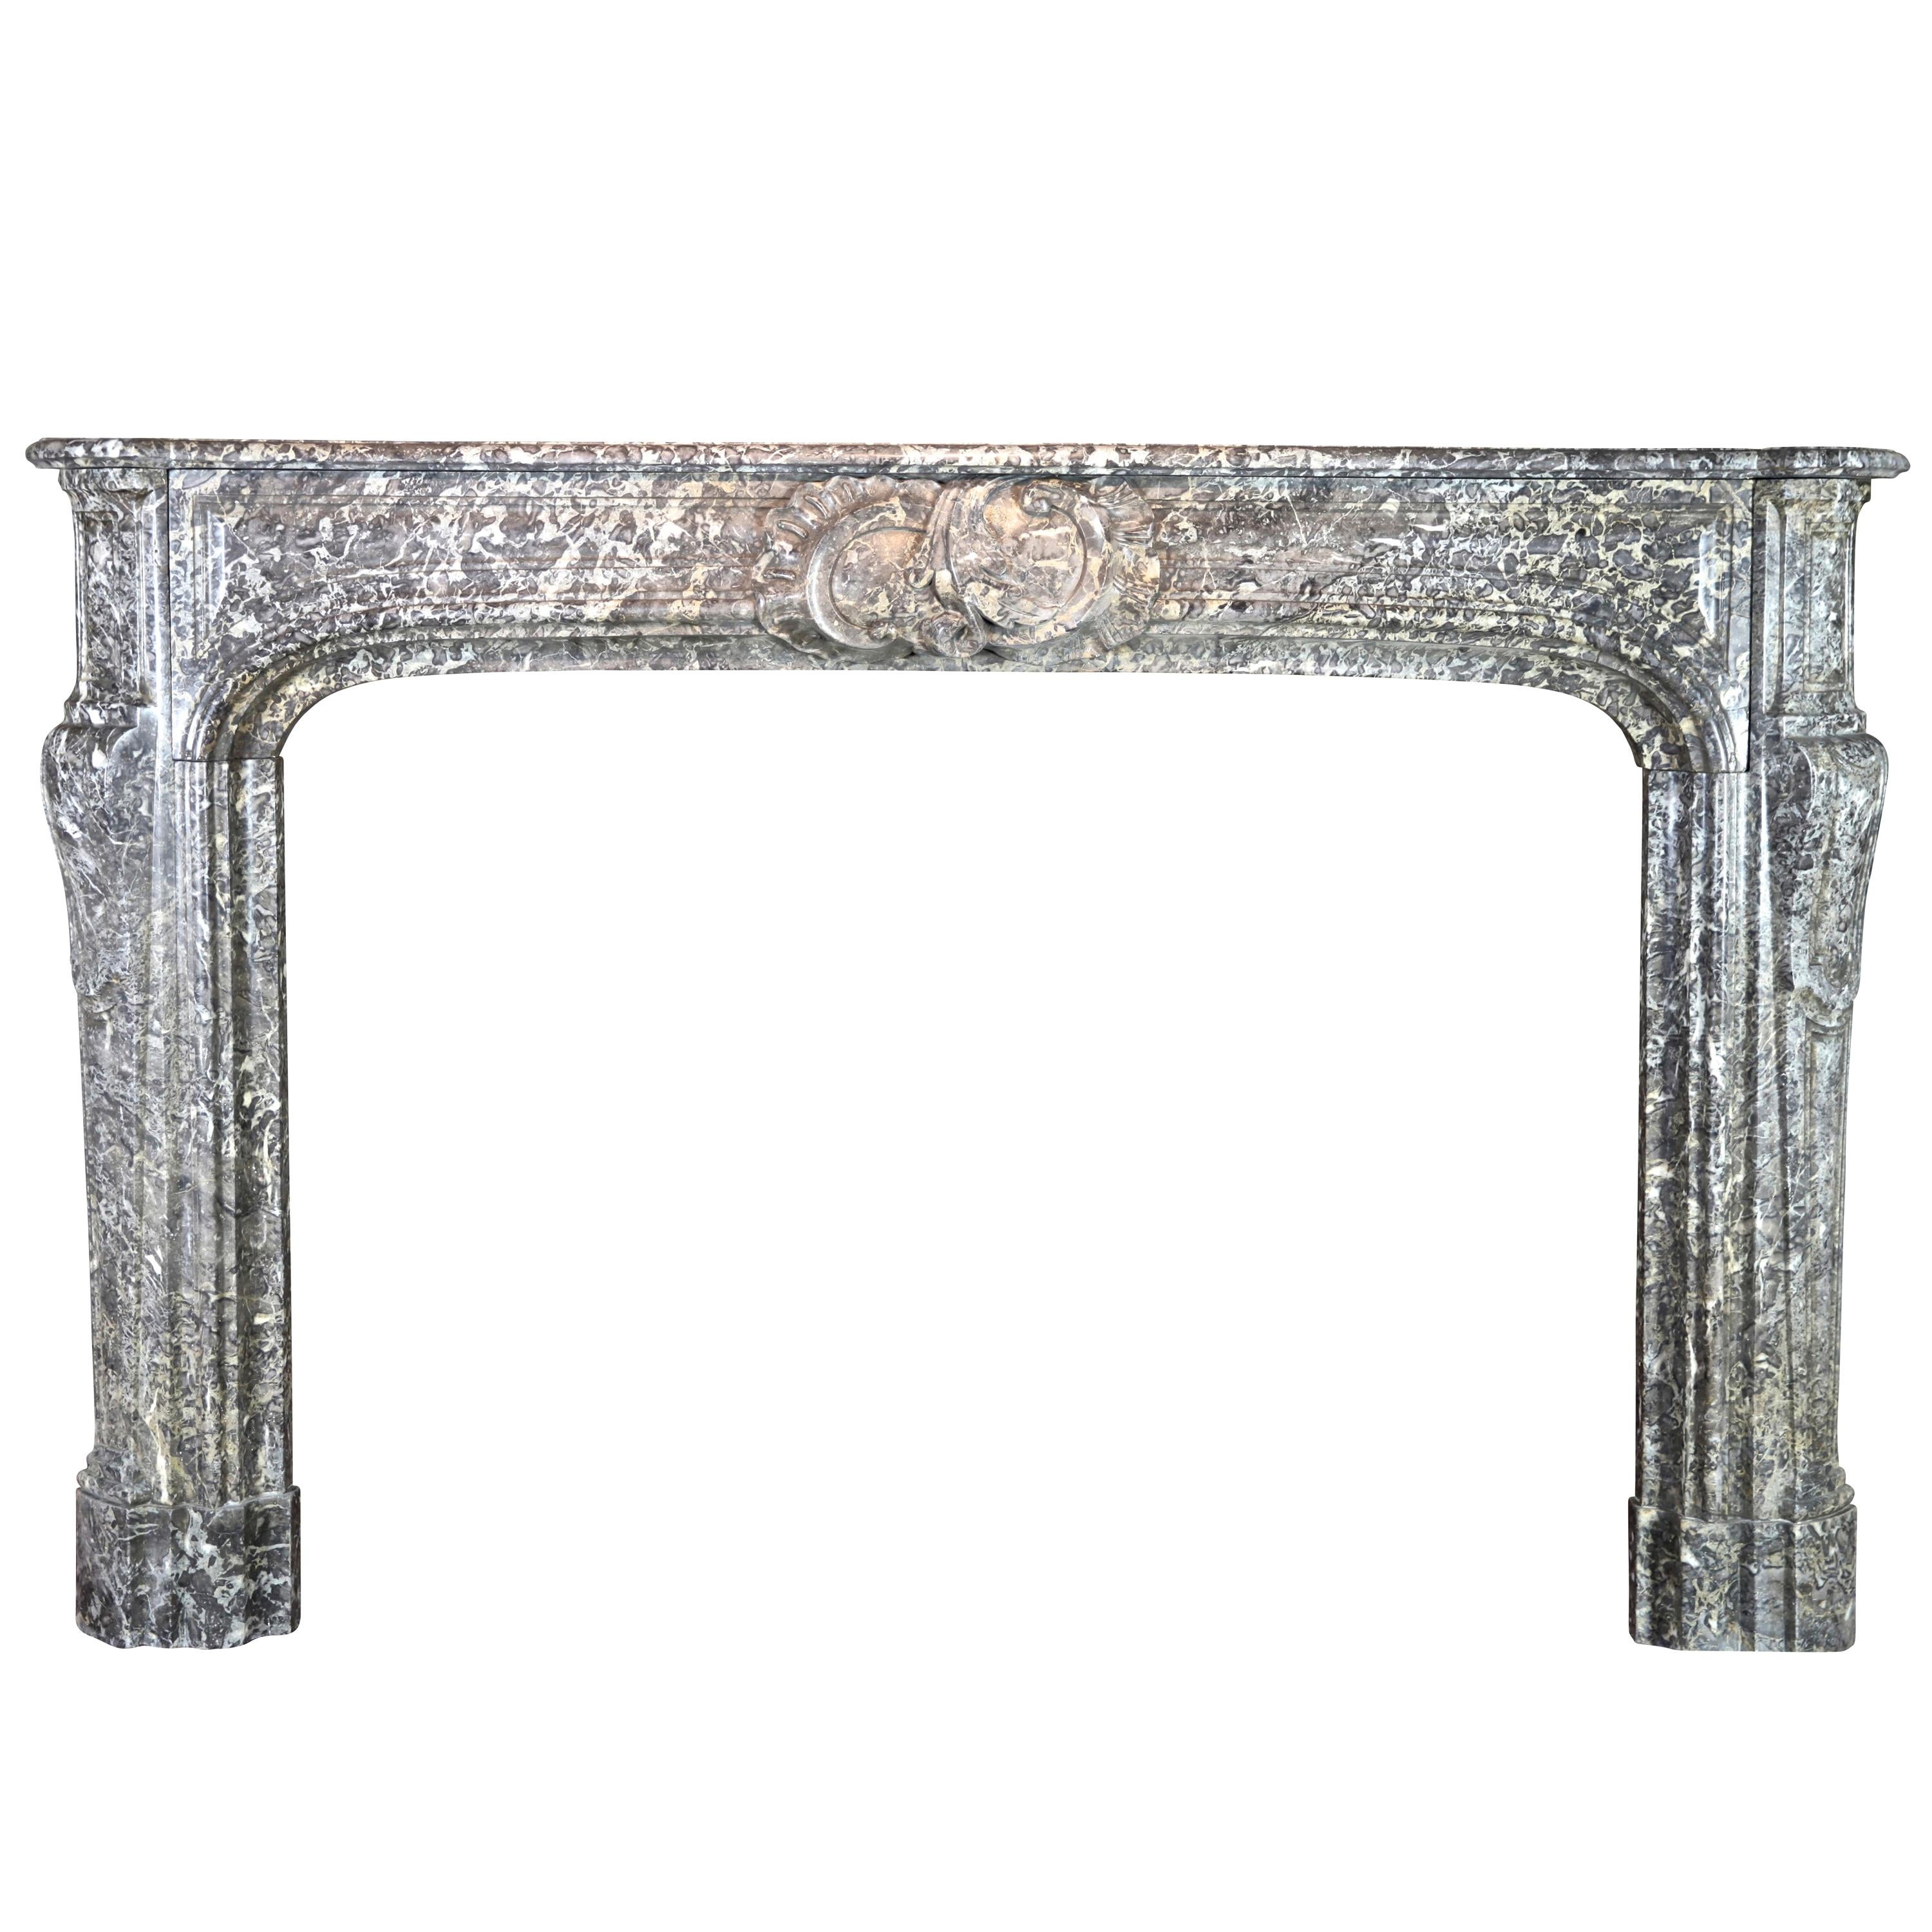 18th Century Classic Antique Fireplace Surround in Grey Belgian Marble